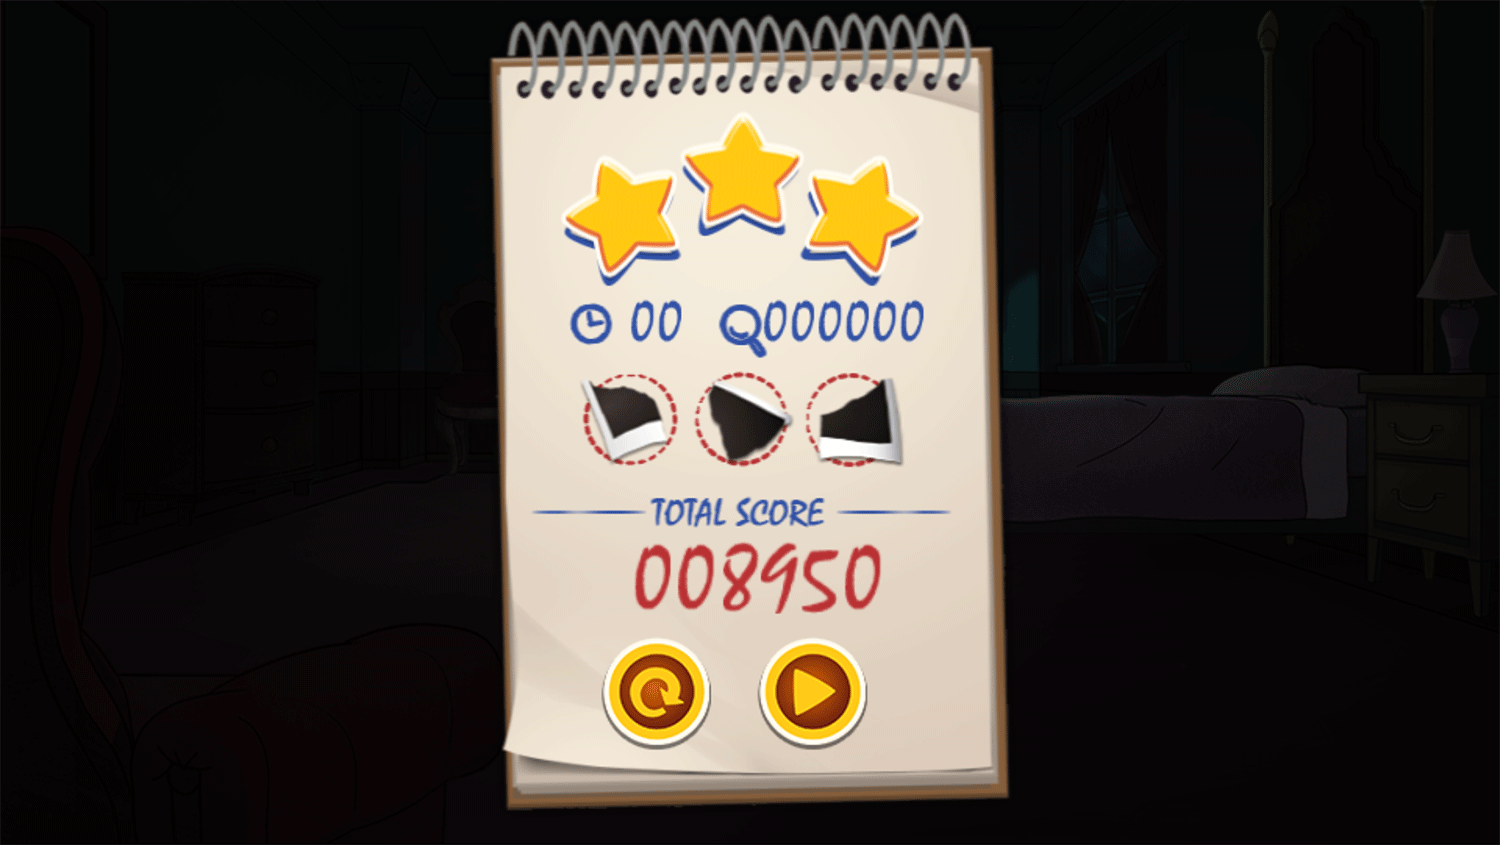 Be Cool Scooby Doo the Mysterious Mansion Score Screenshot.